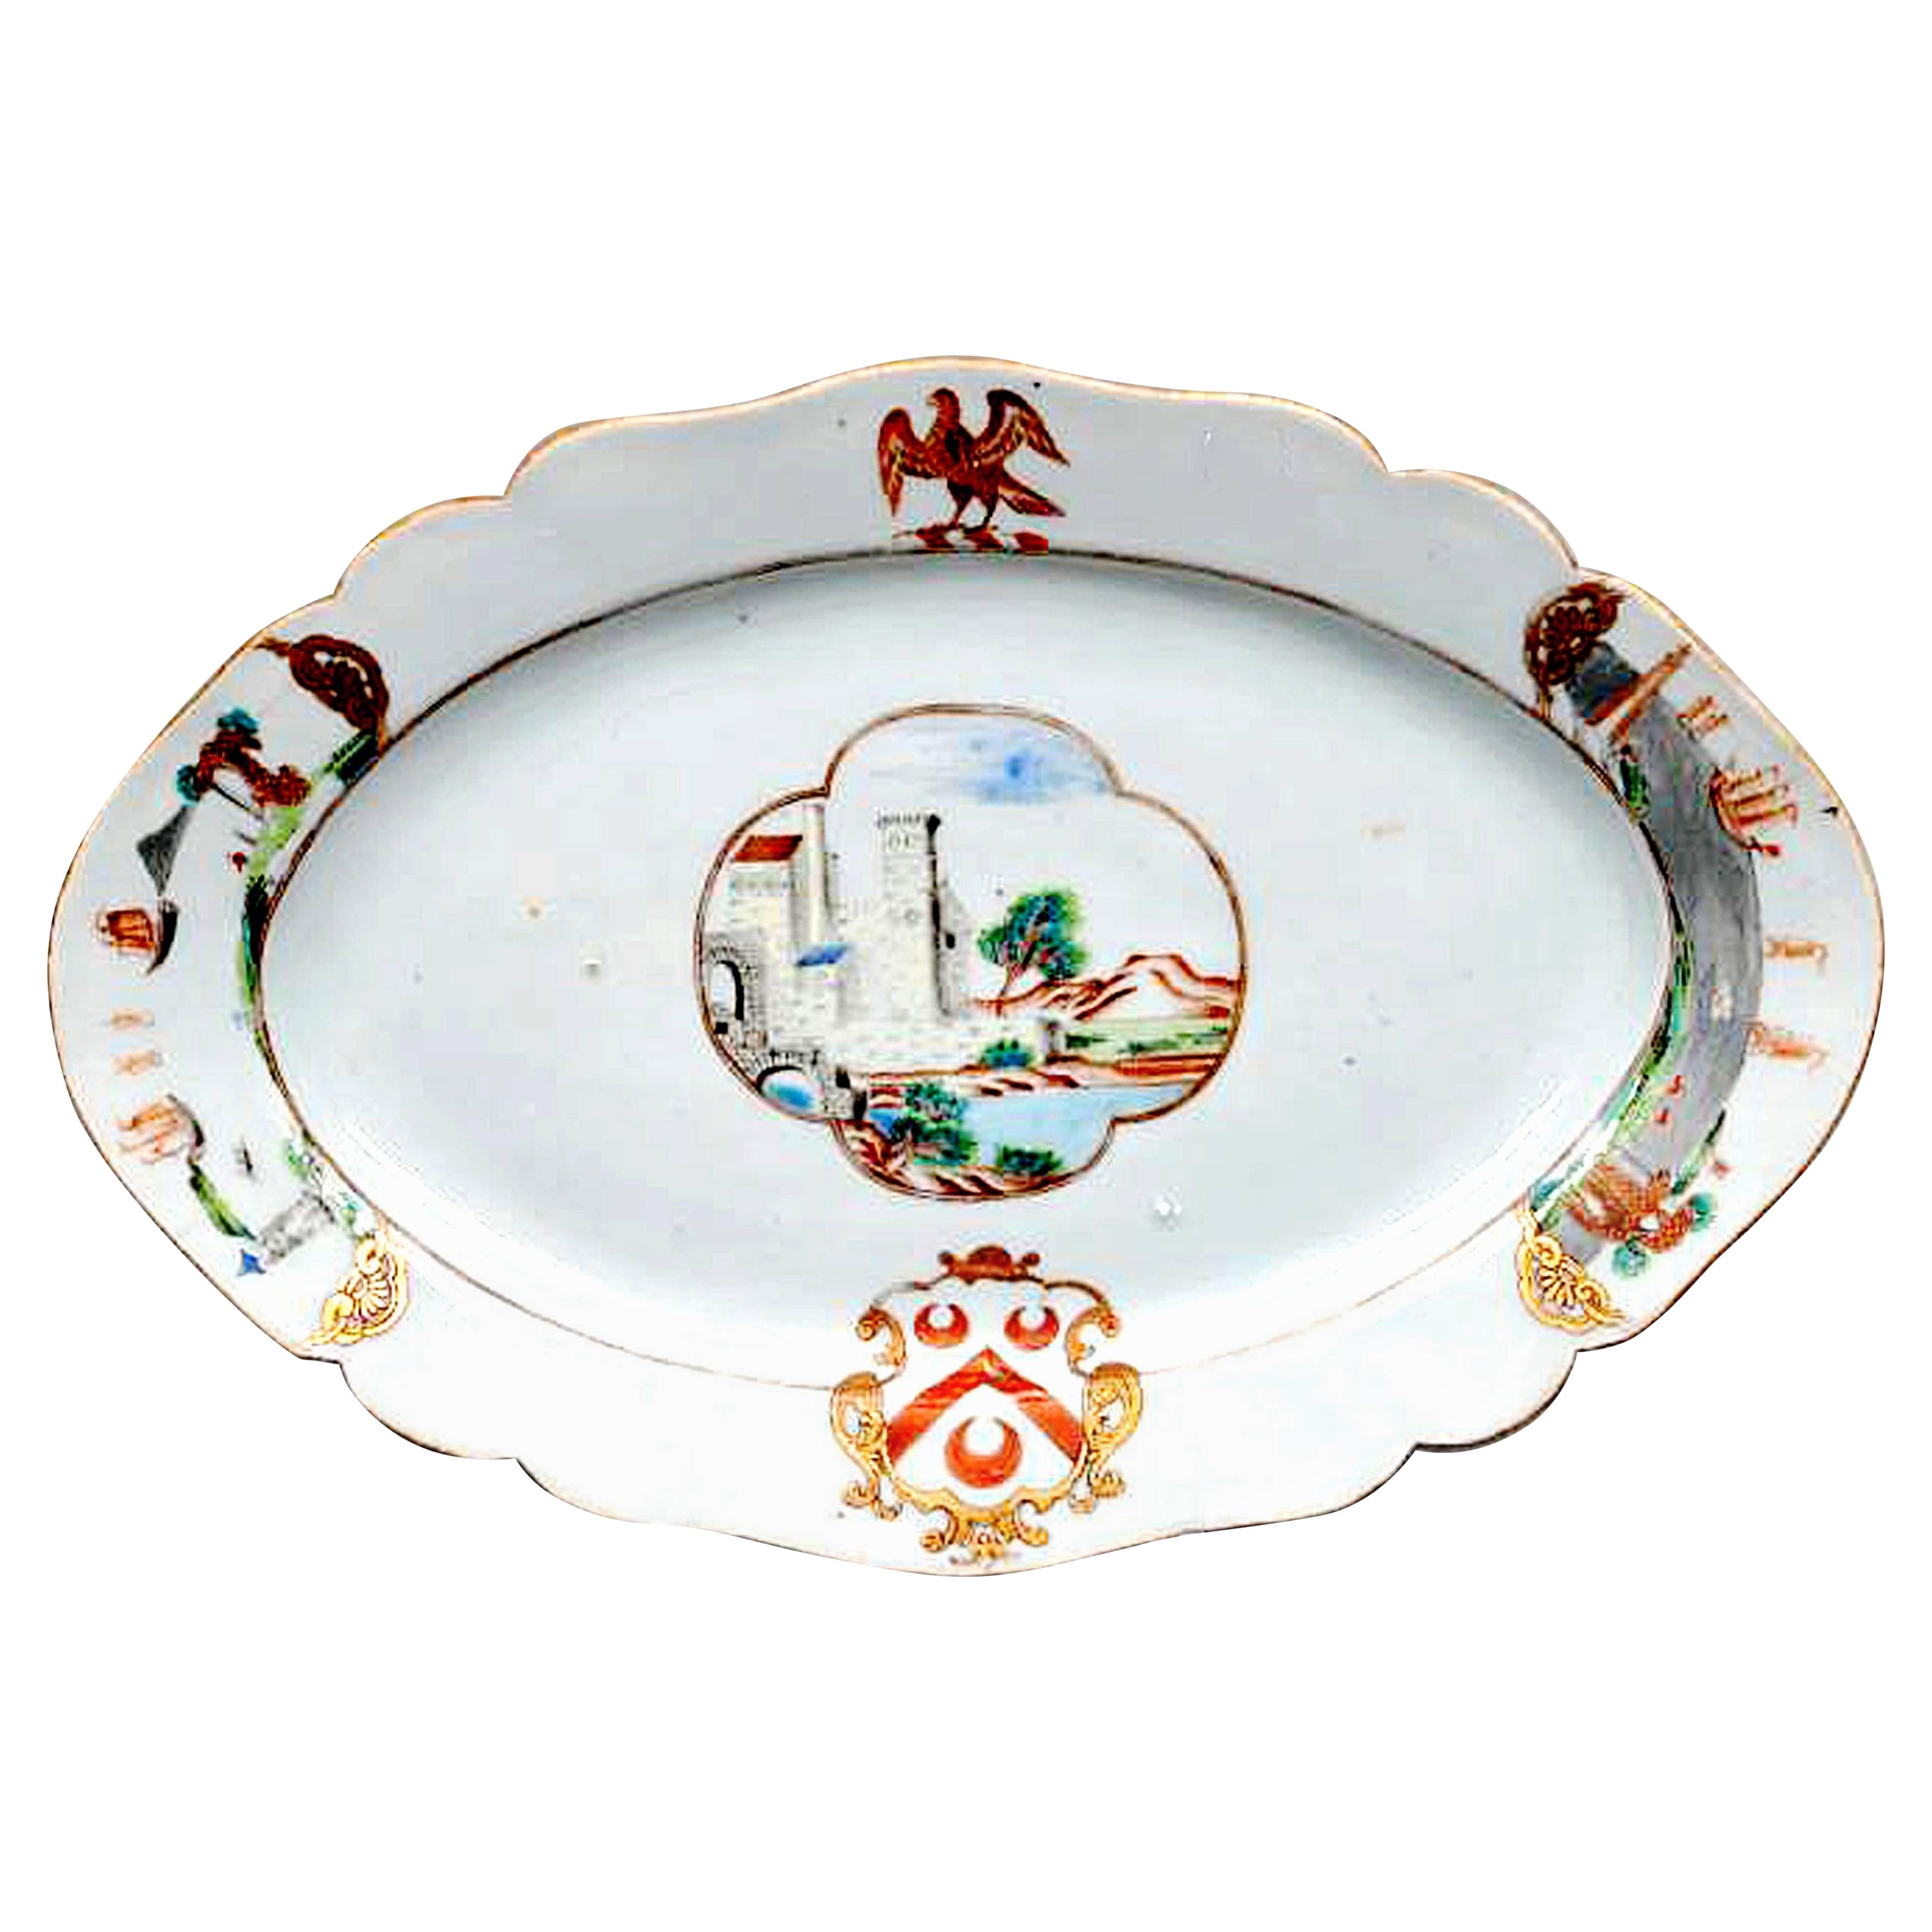 Chinese Export Armorial Porcelain Dish, Arms of Pole, circa 1745